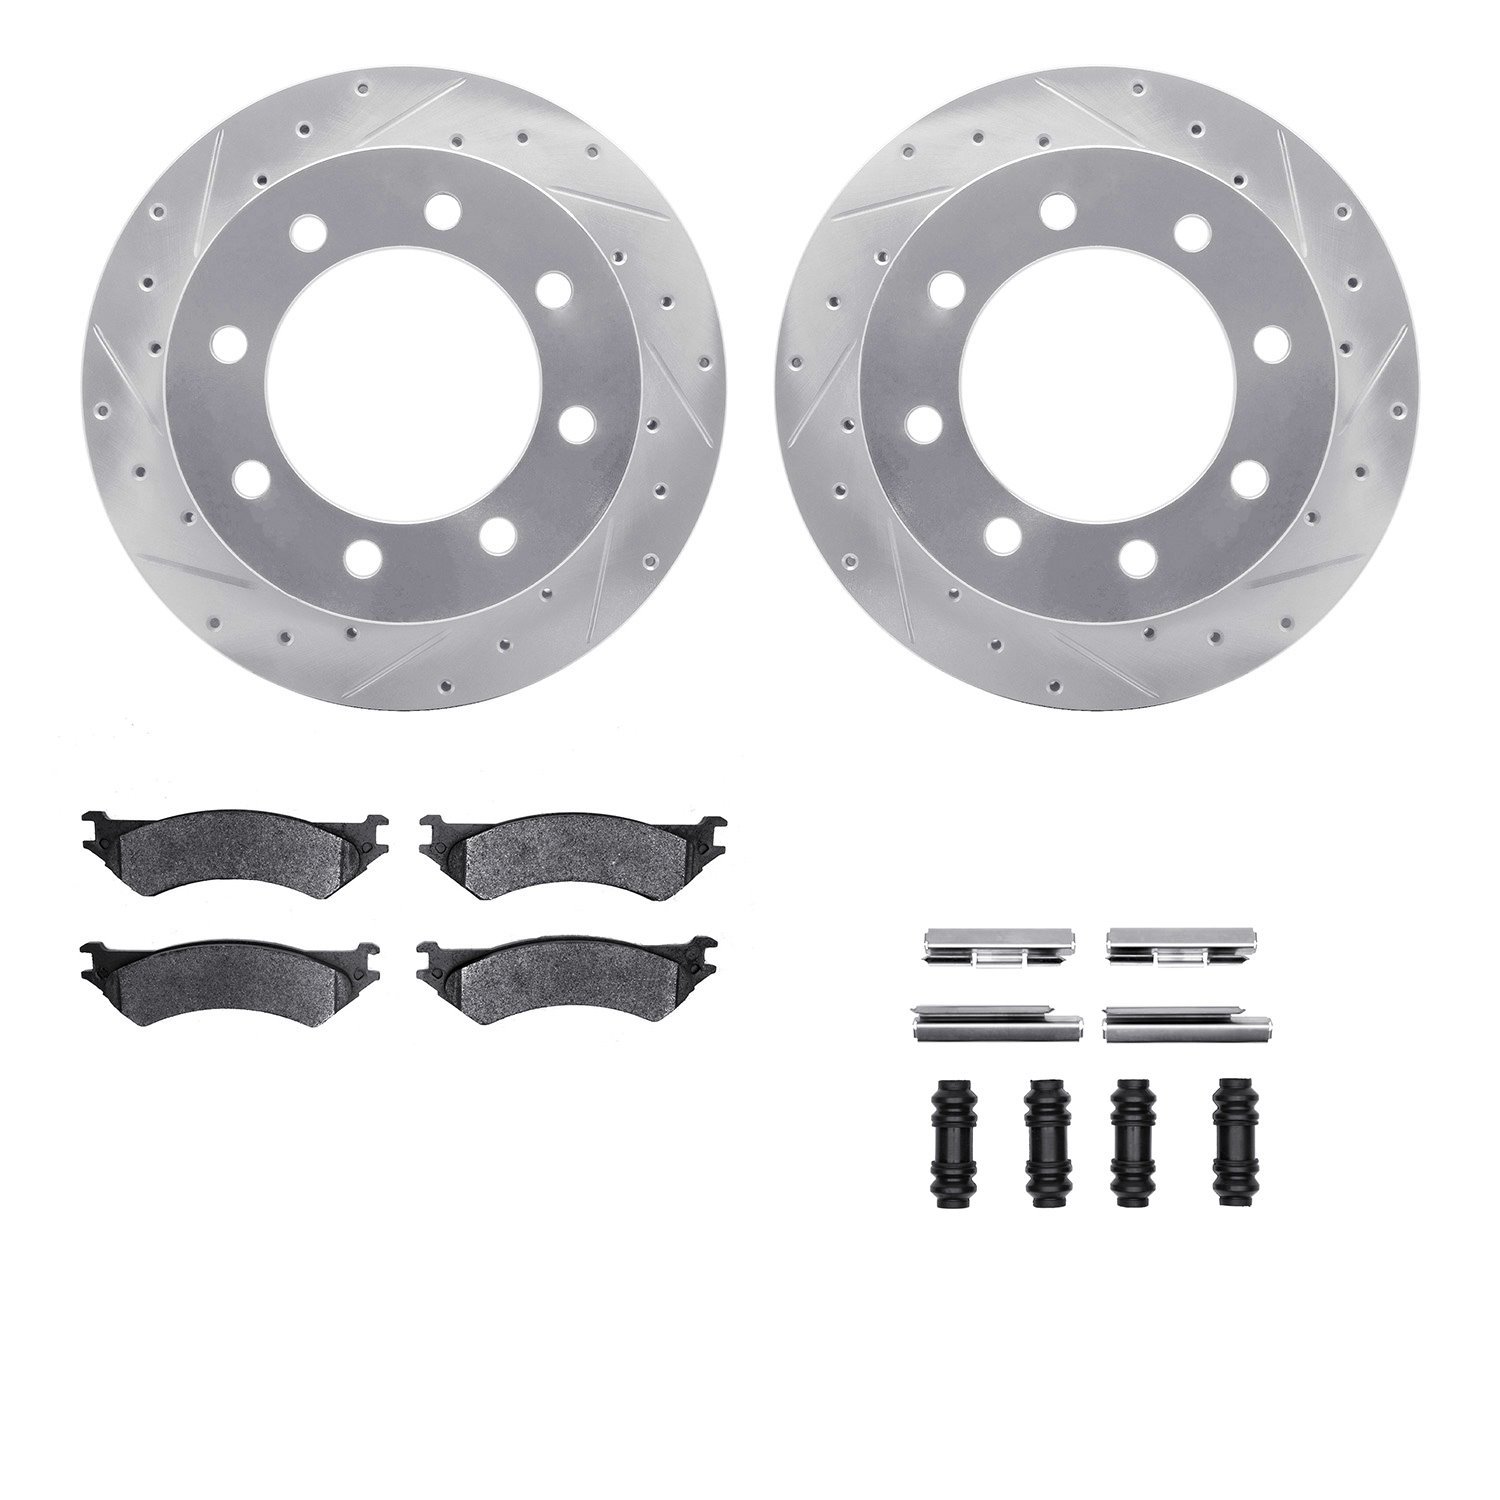 7412-54054 Drilled/Slotted Brake Rotors with Ultimate-Duty Brake Pads Kit & Hardware [Silver], 1999-2007 Ford/Lincoln/Mercury/Ma